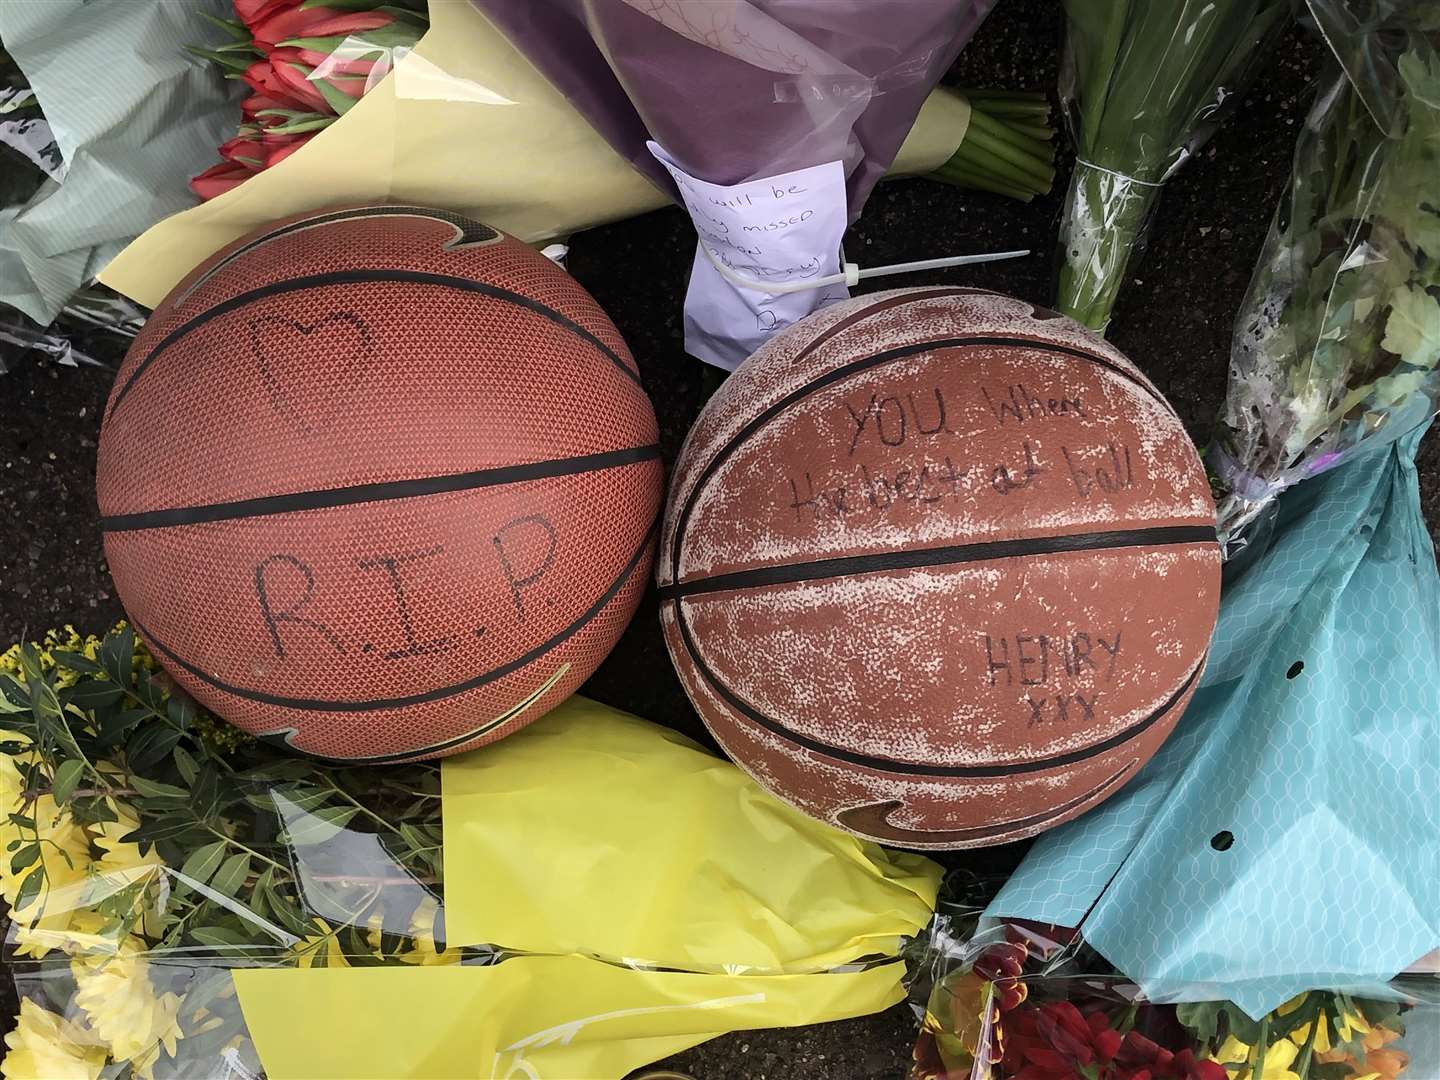 Floral, candle and basketball tributes have been laid in Vale Road